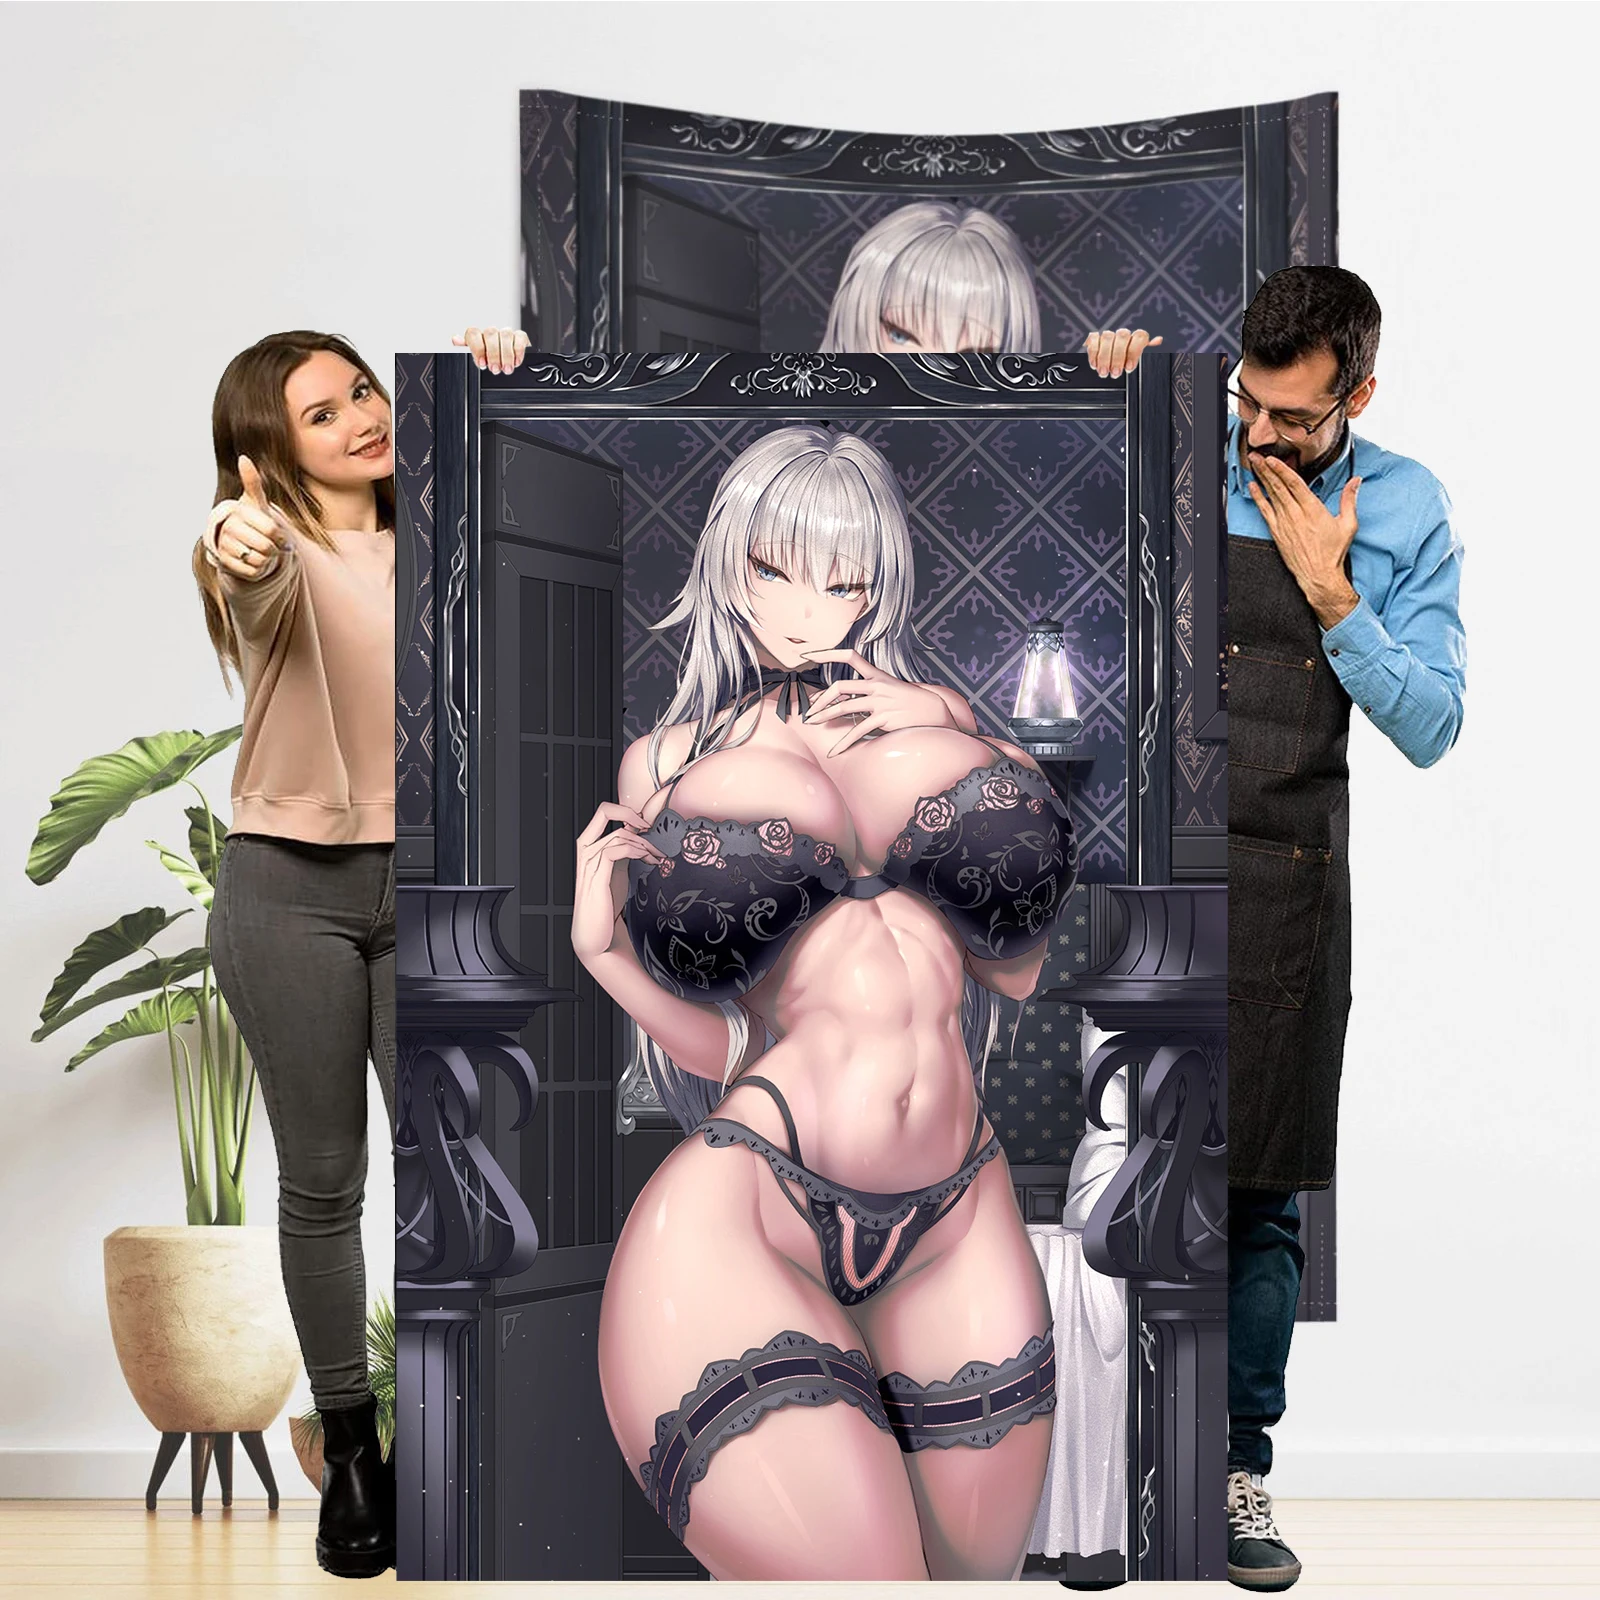 Hentai Anime Poster Tapestry Artist CG Tapestries Lingerie Milf Wall Hanging Sexy Adult Doujin Tapestrys H Doujinshi Merch Tapes